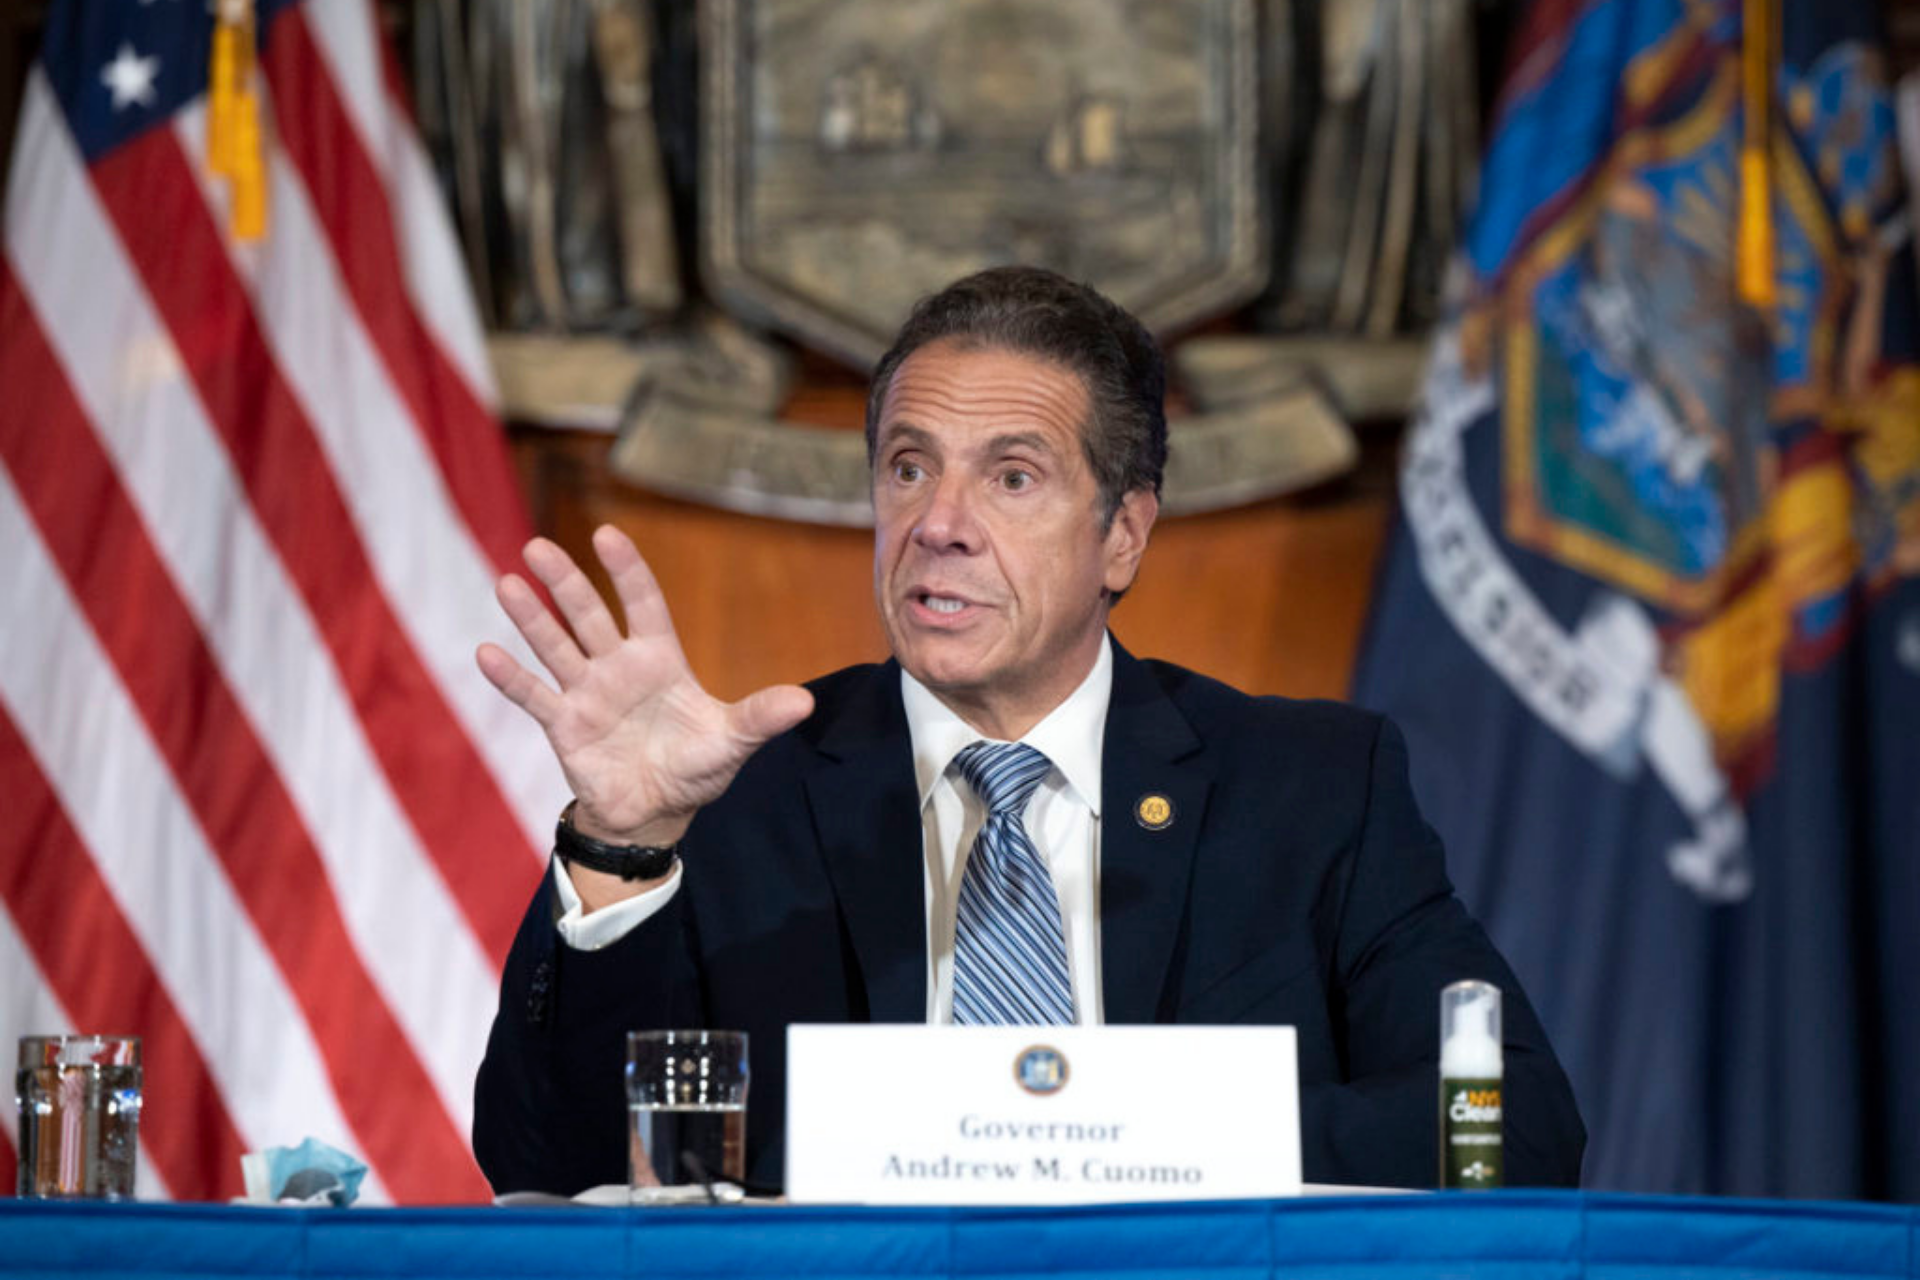 Governor Cuomo speaking publicly